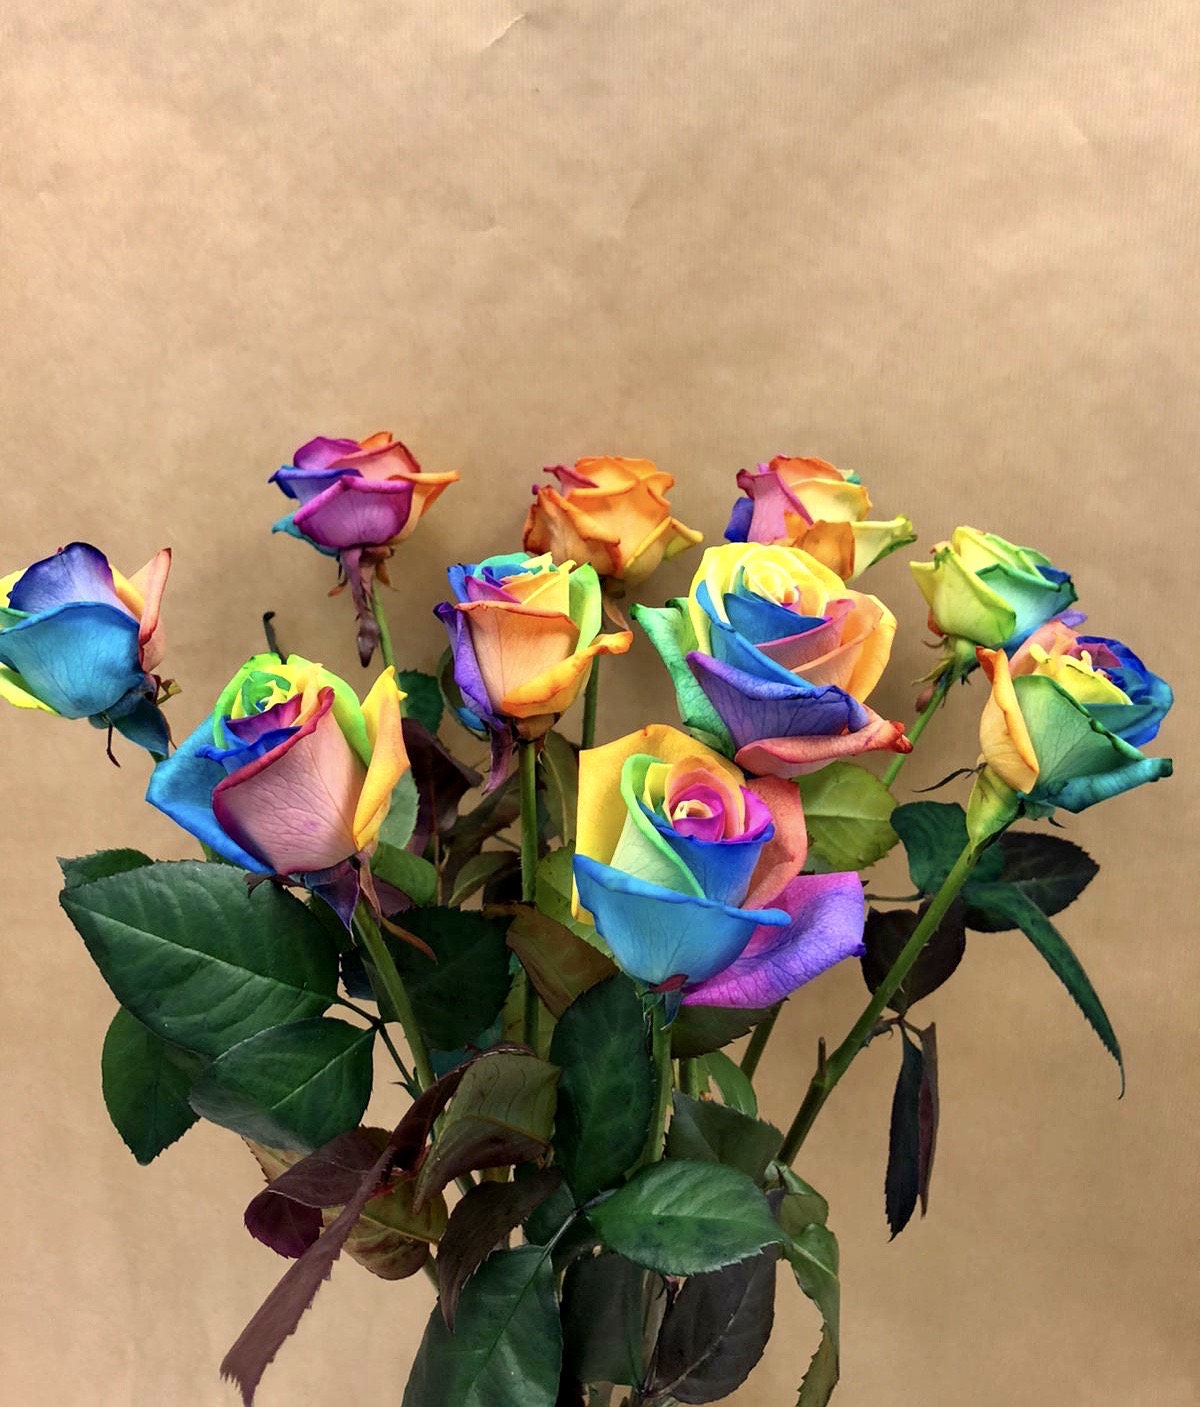 10 Rainbow Roses In A Vase